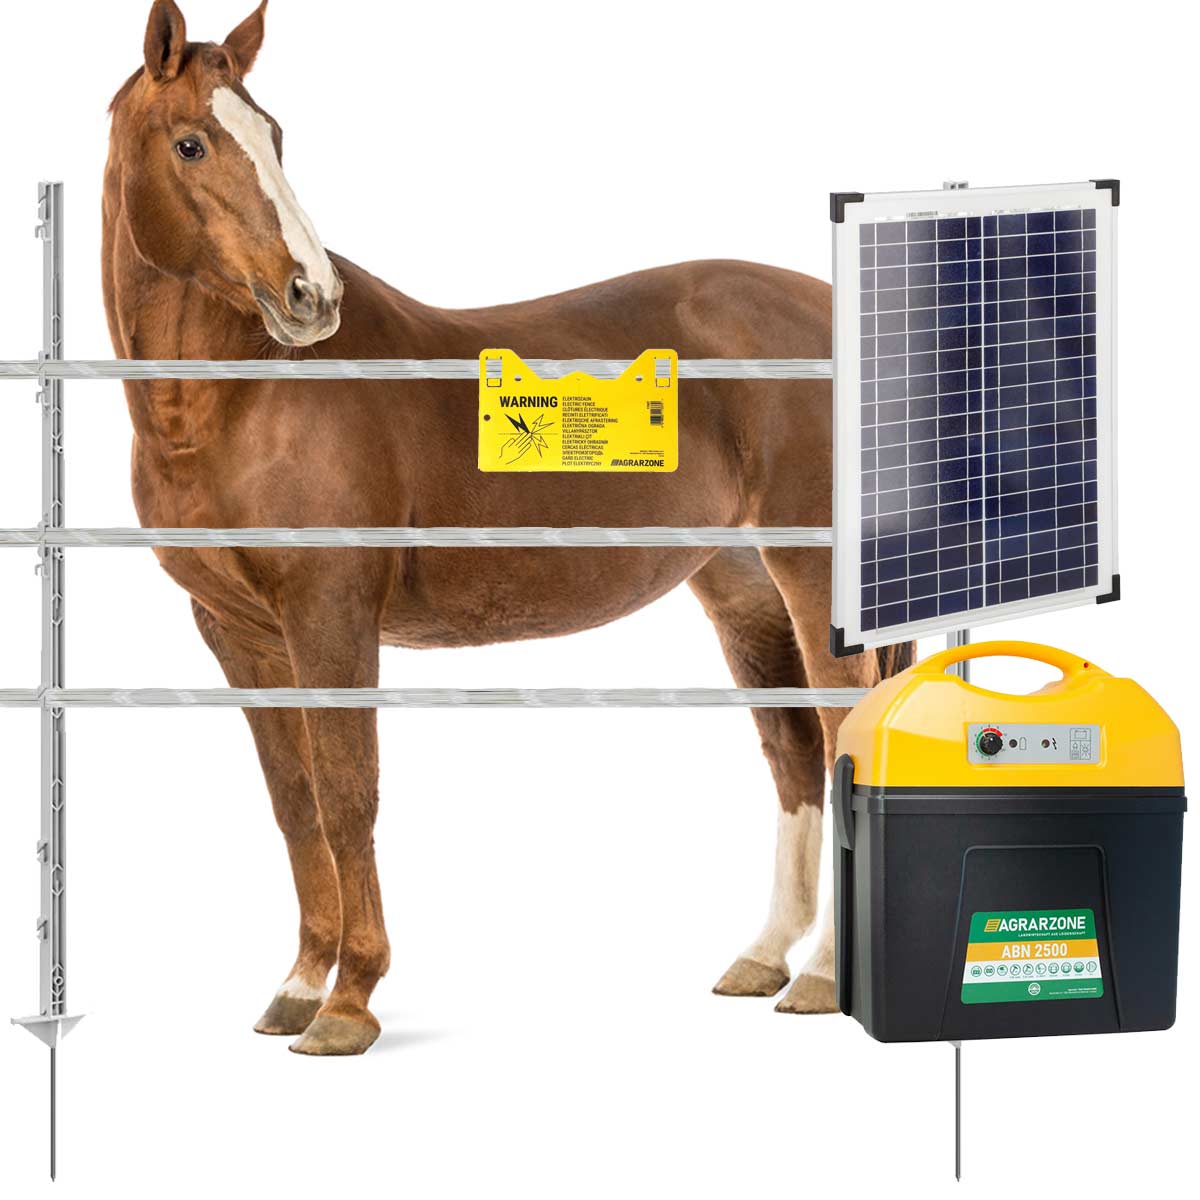 Horse fence set abn2500 solar, tape 1000m, 3 rows, 1 gate